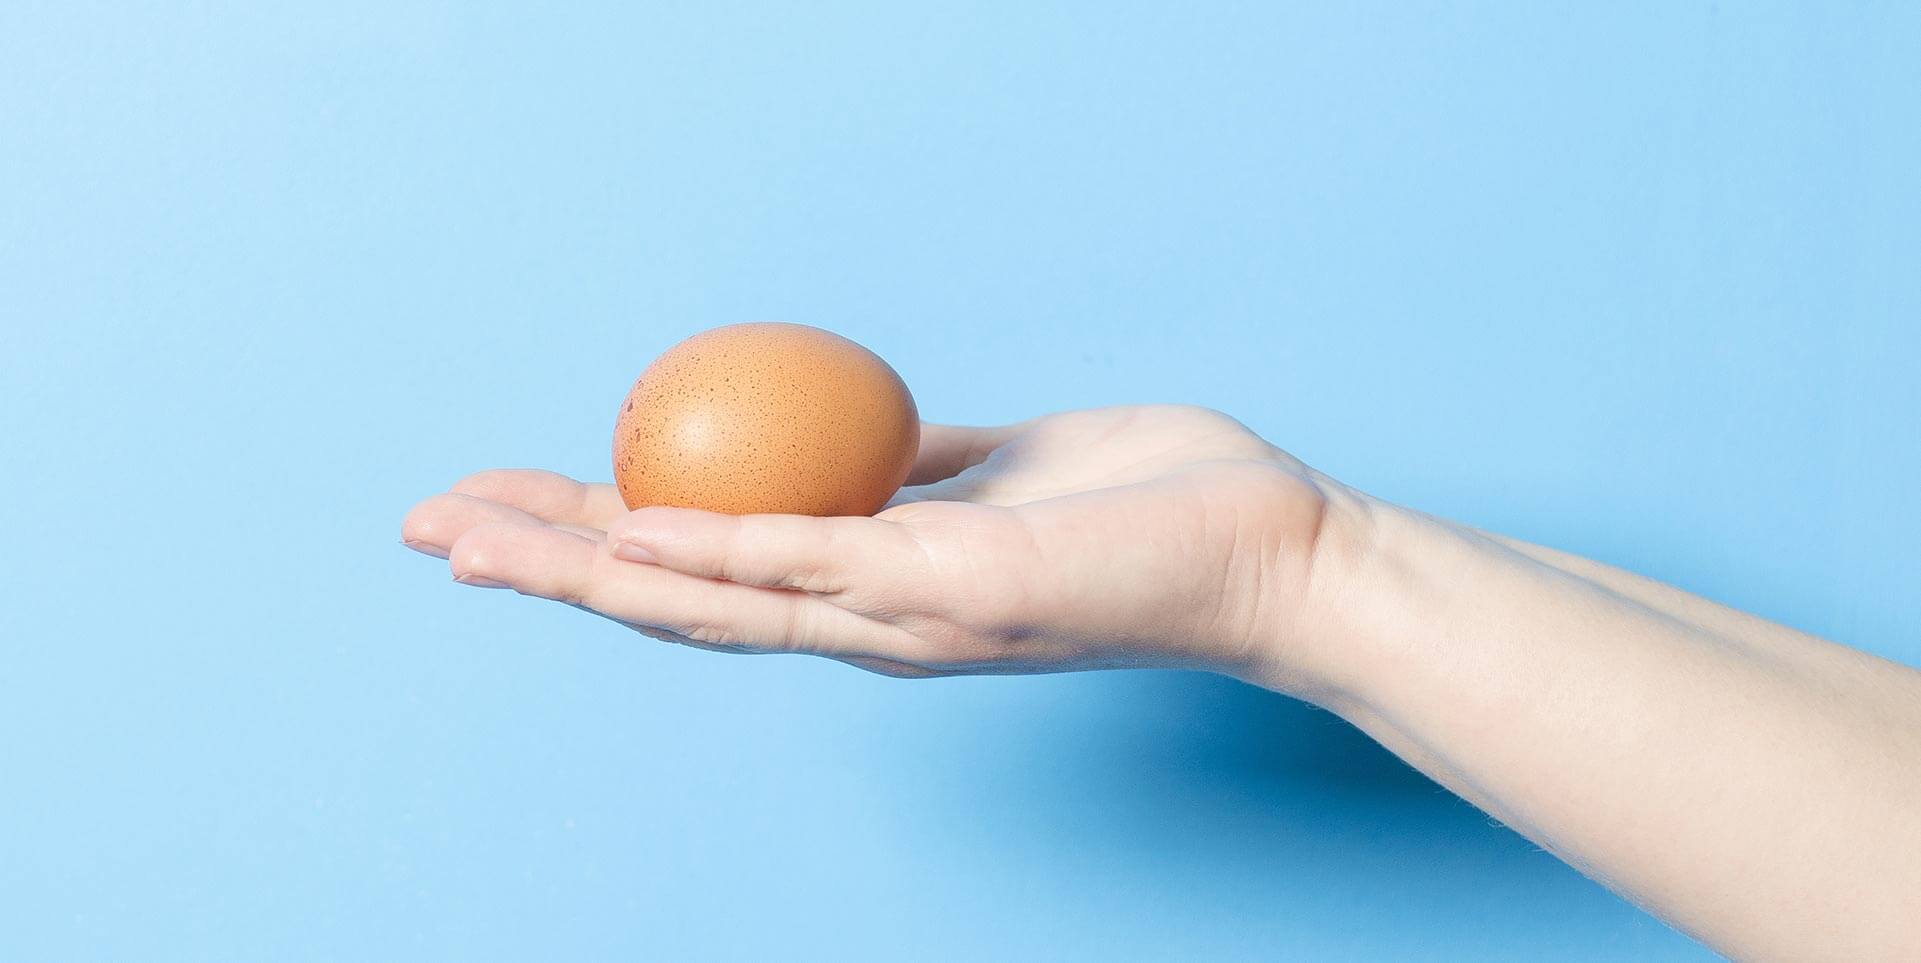 Hand holding a single brown egg against a blue background